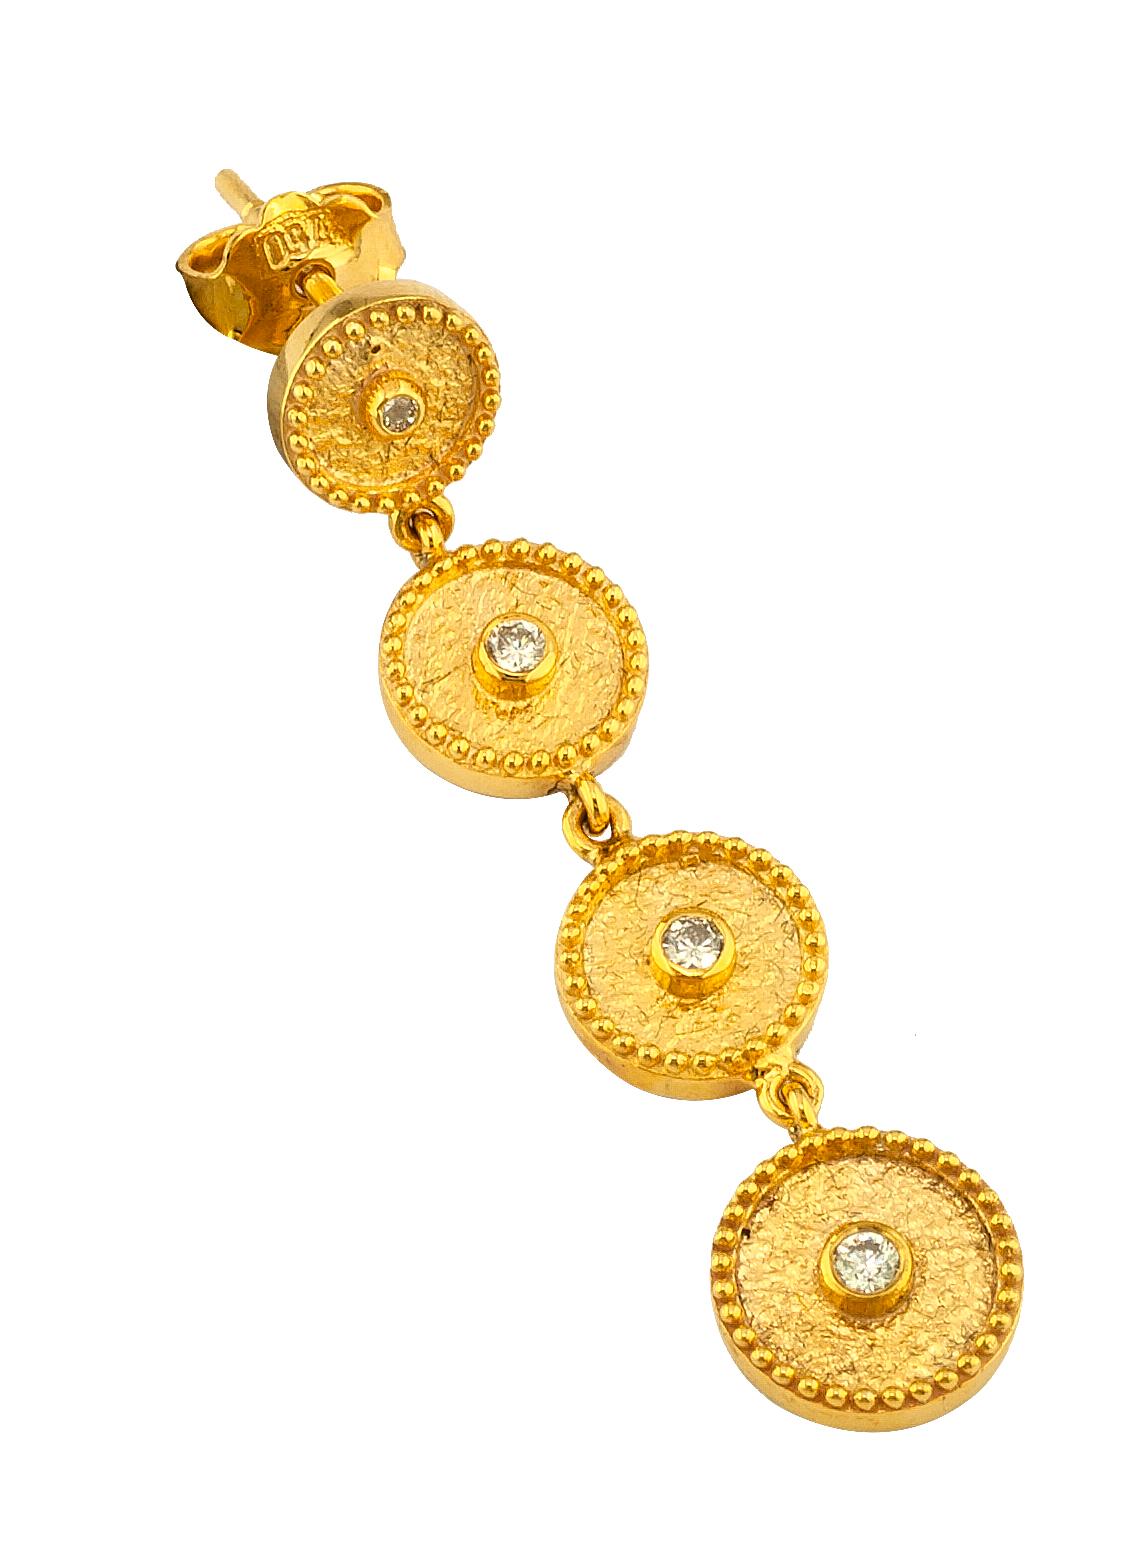 These S.Georgios designer earrings are hand made from 18 Karat Yellow Gold and decorated with Byzantine-era style granulation workmanship done microscopically. This stunning pair of dangle earrings features 8 brilliant-cut natural White Diamonds